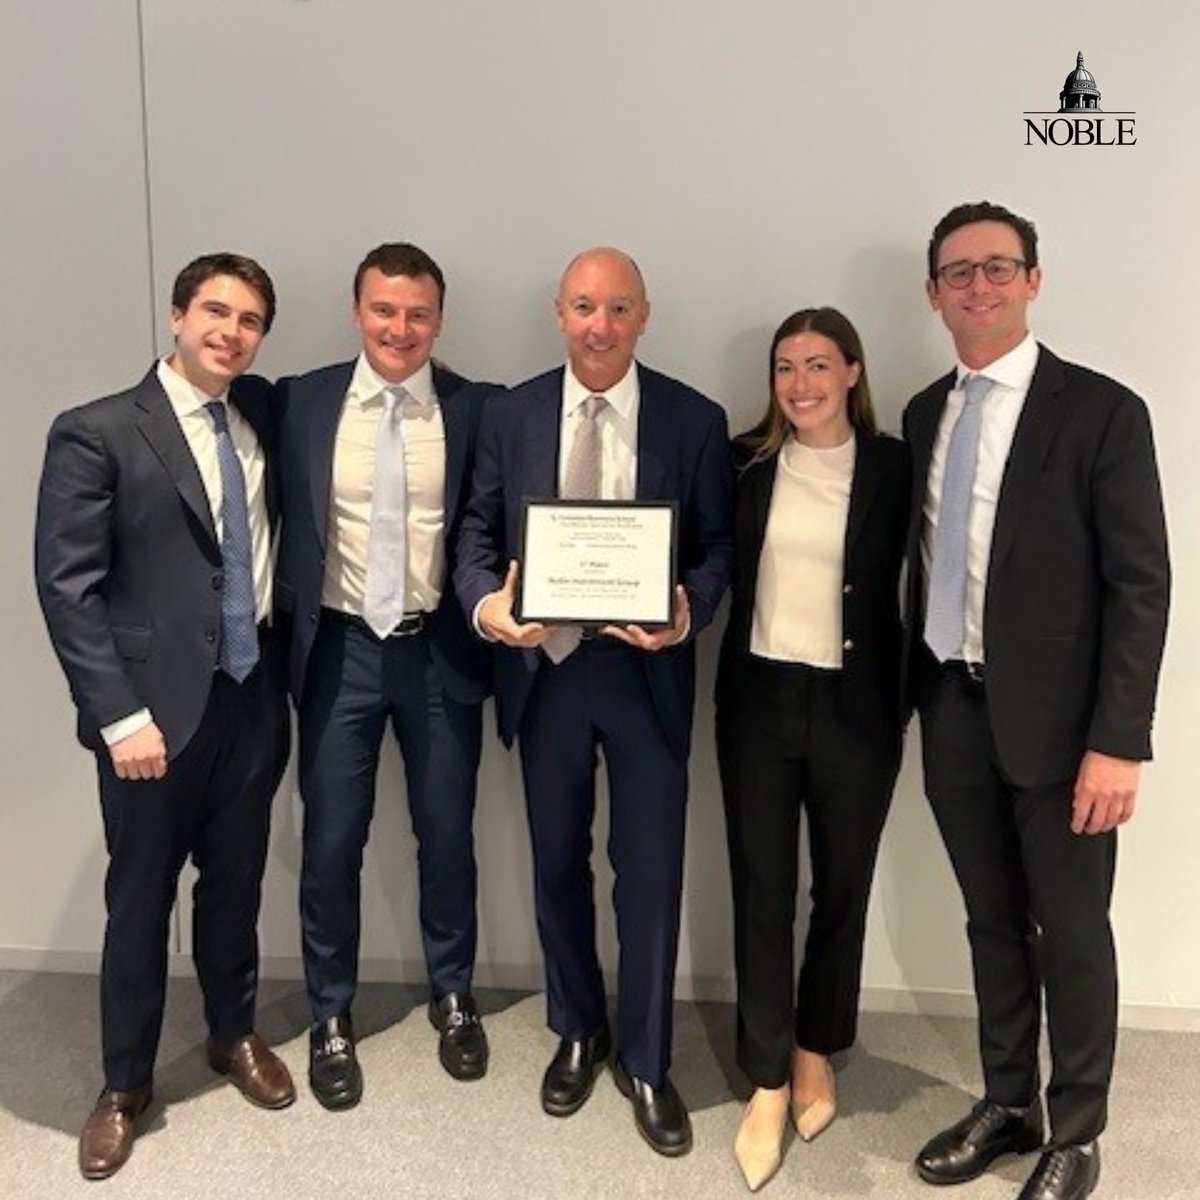 Congratulations to Noble’s George Dabney and team on winning first place at the prestigious Alexander Bodini Foundation Competition at @Columbia_Biz. This cornerstone real-estate competition challenges students to apply their analytical and strategic prowess to real-world